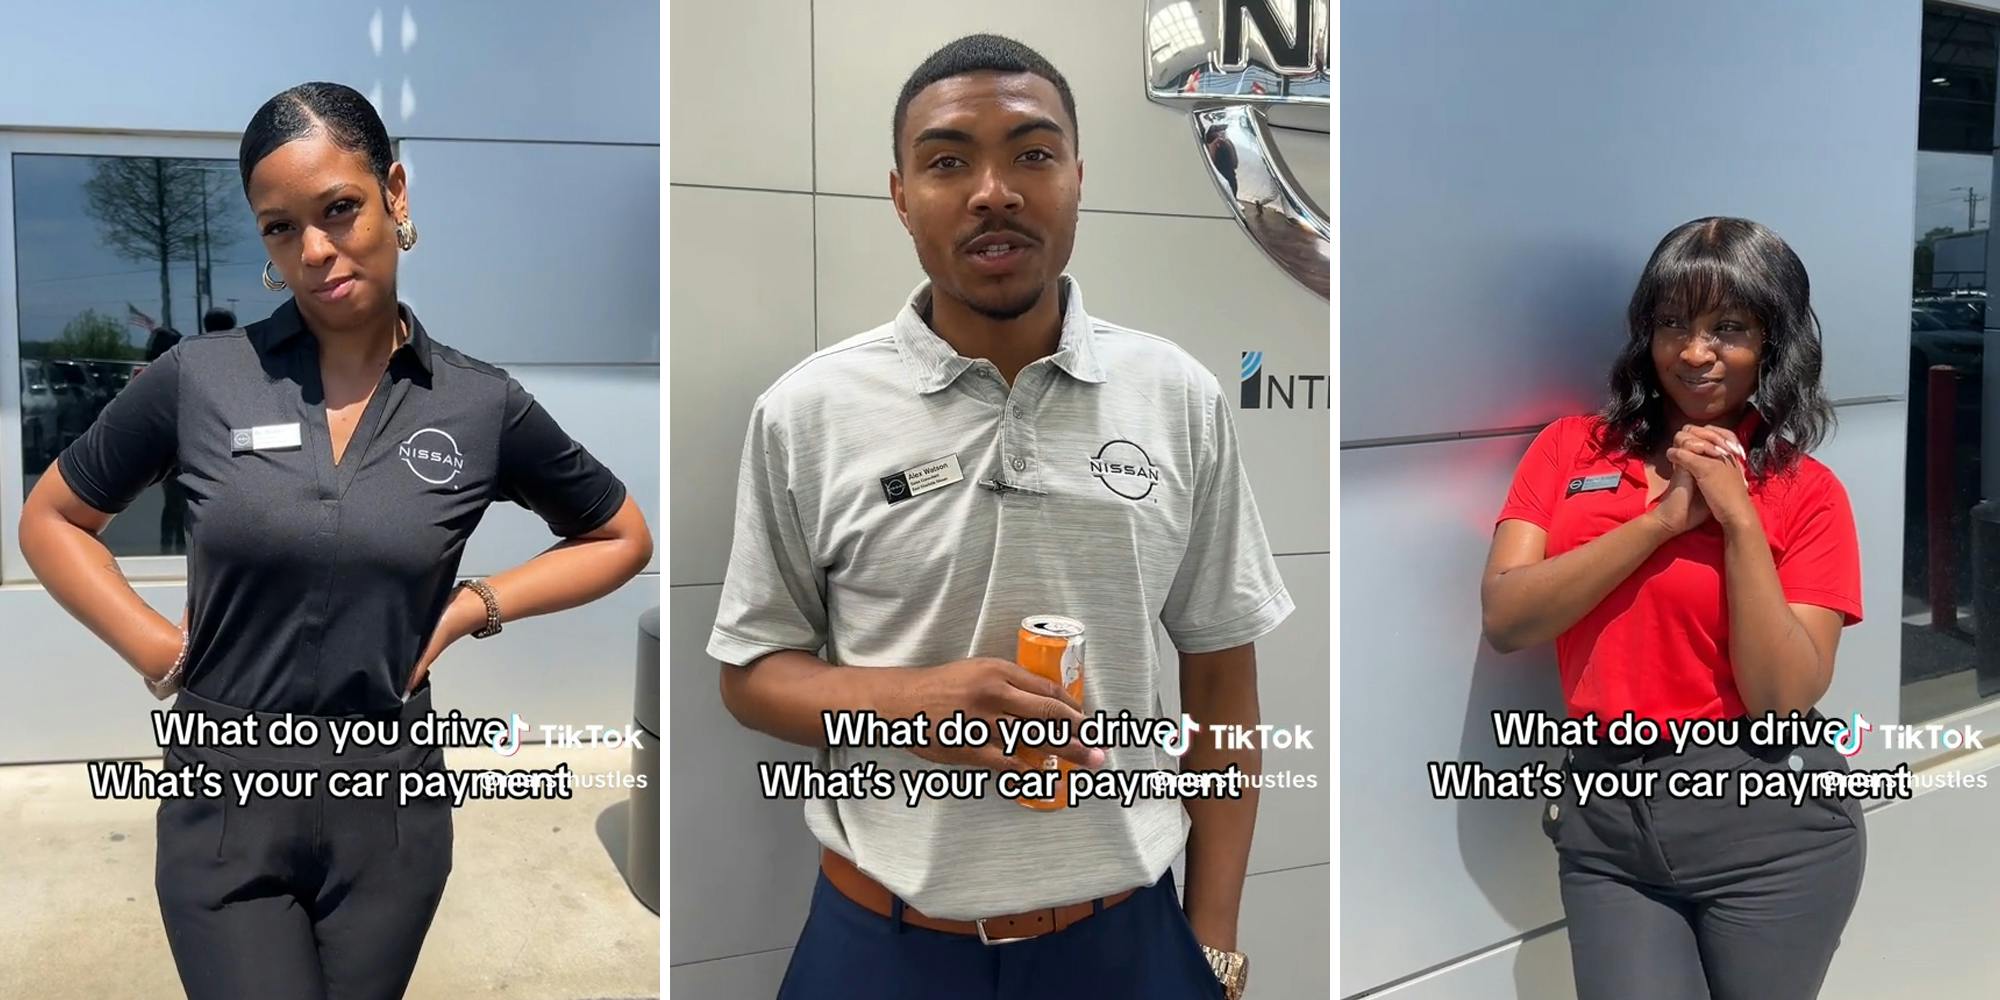 nissan employees at dealership with caption "what do you drive, what's your car payment?"